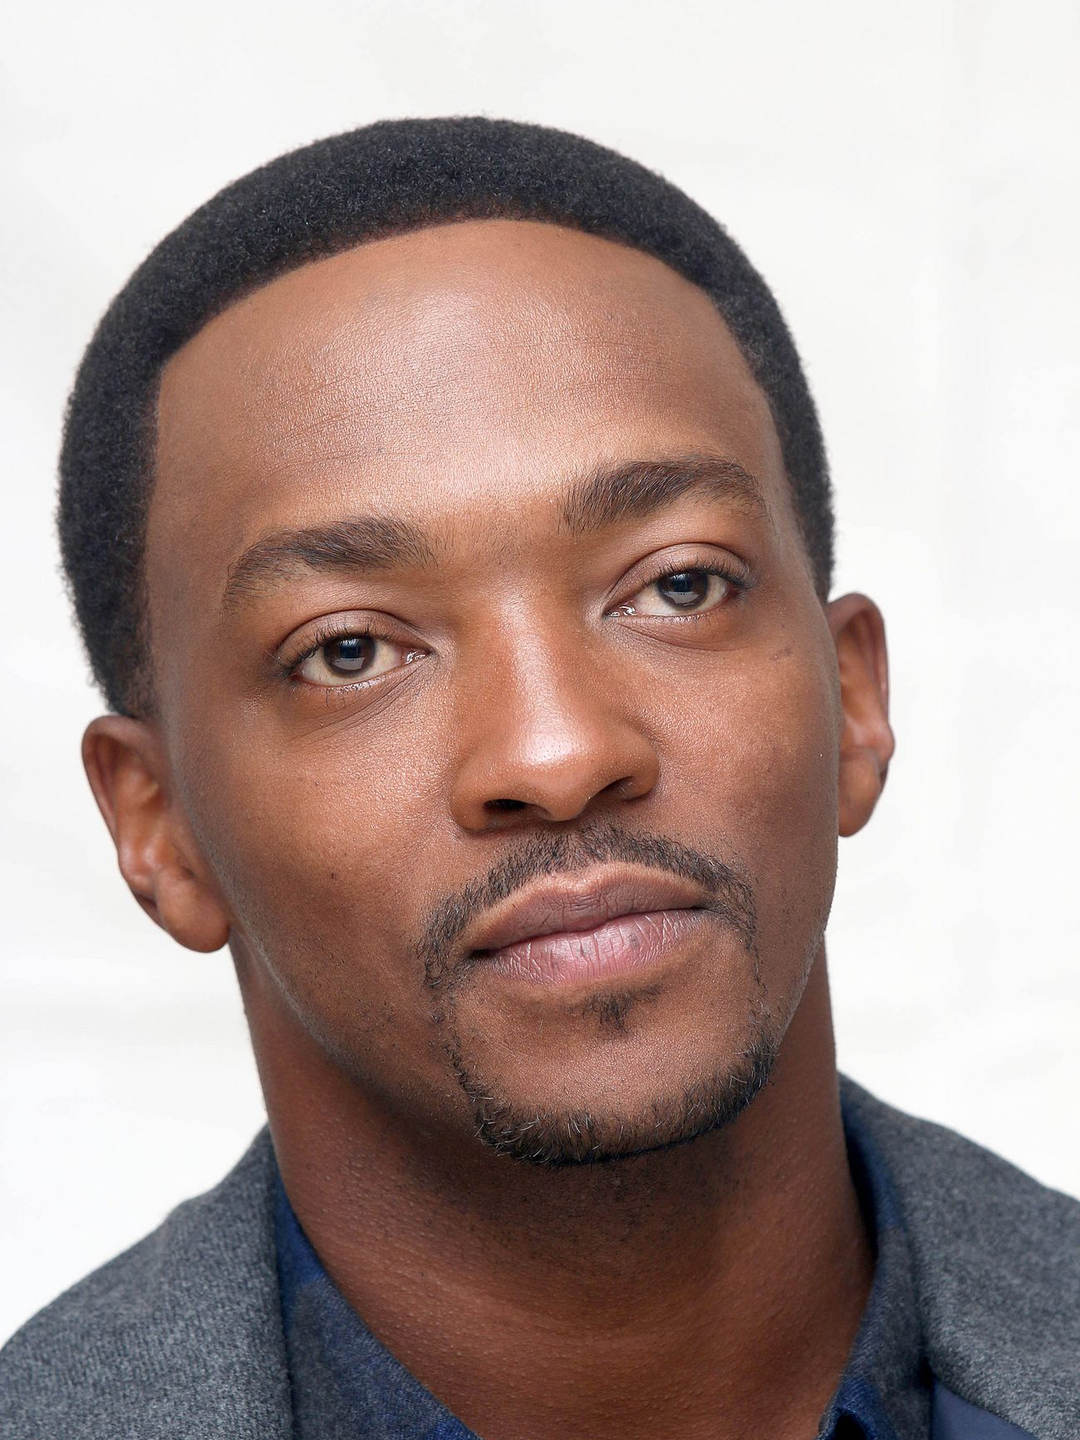 Anthony Mackie does he have kids